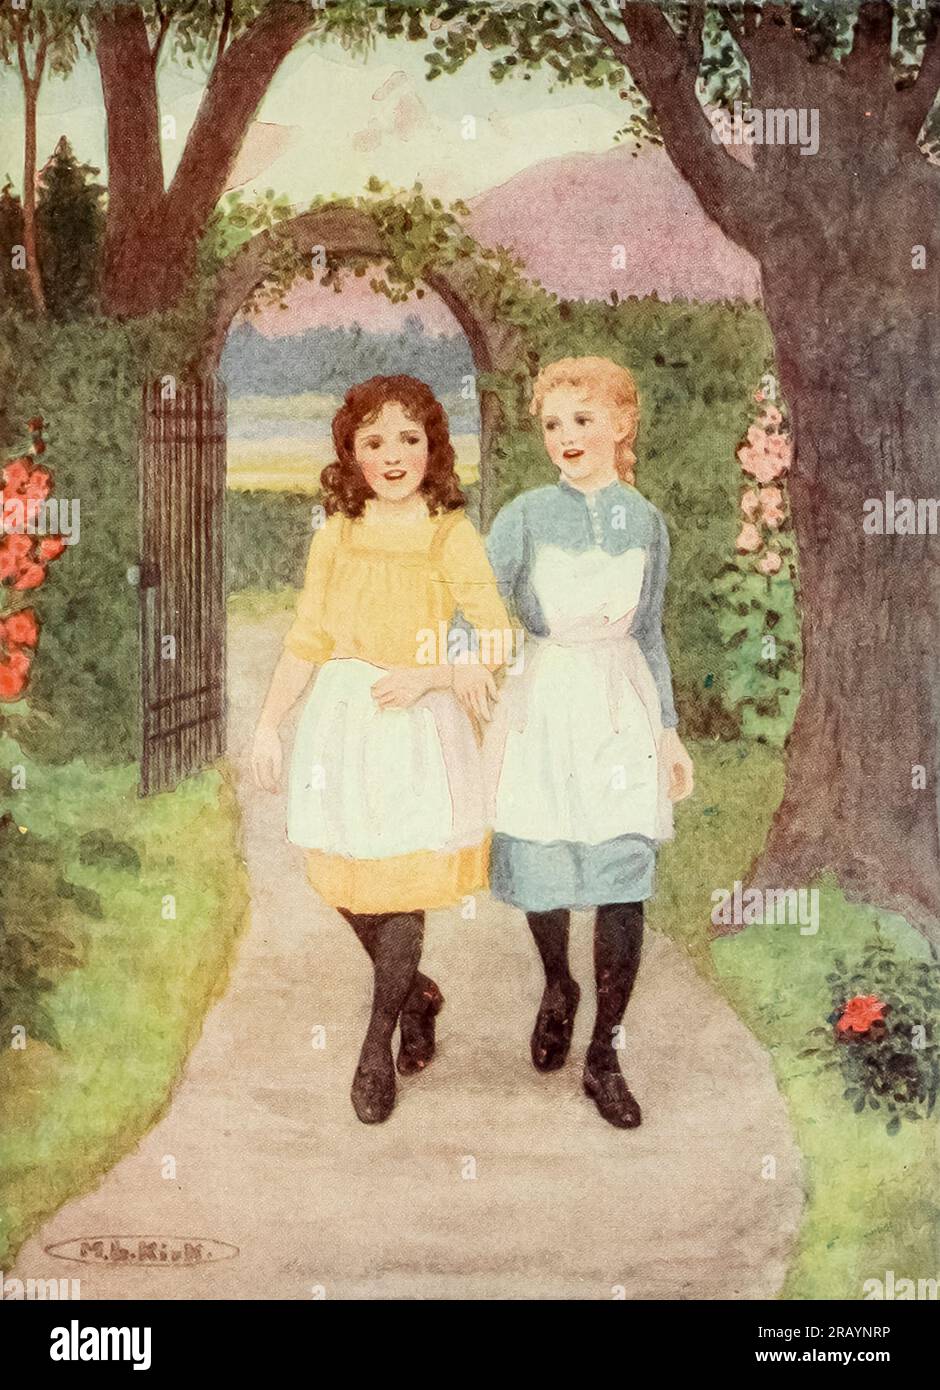 Dora and Paula returned to the garden arm in arm singing gaily illustrated by Maria L. Kirk from the book ' Dora ' by Spyri, Johanna, 1827-1901 Publication date 1924 Publisher Philadelphia & London, J.B. Lippincott Johanna Louise Spyri (12 June 1827 – 7 July 1901) was a Swiss author of novels, notably children's stories. She wrote the popular book Heidi. Born in Hirzel, a rural area in the canton of Zürich, as a child she spent several summers near Chur in Graubünden, the setting she later would use in her novels. Stock Photo